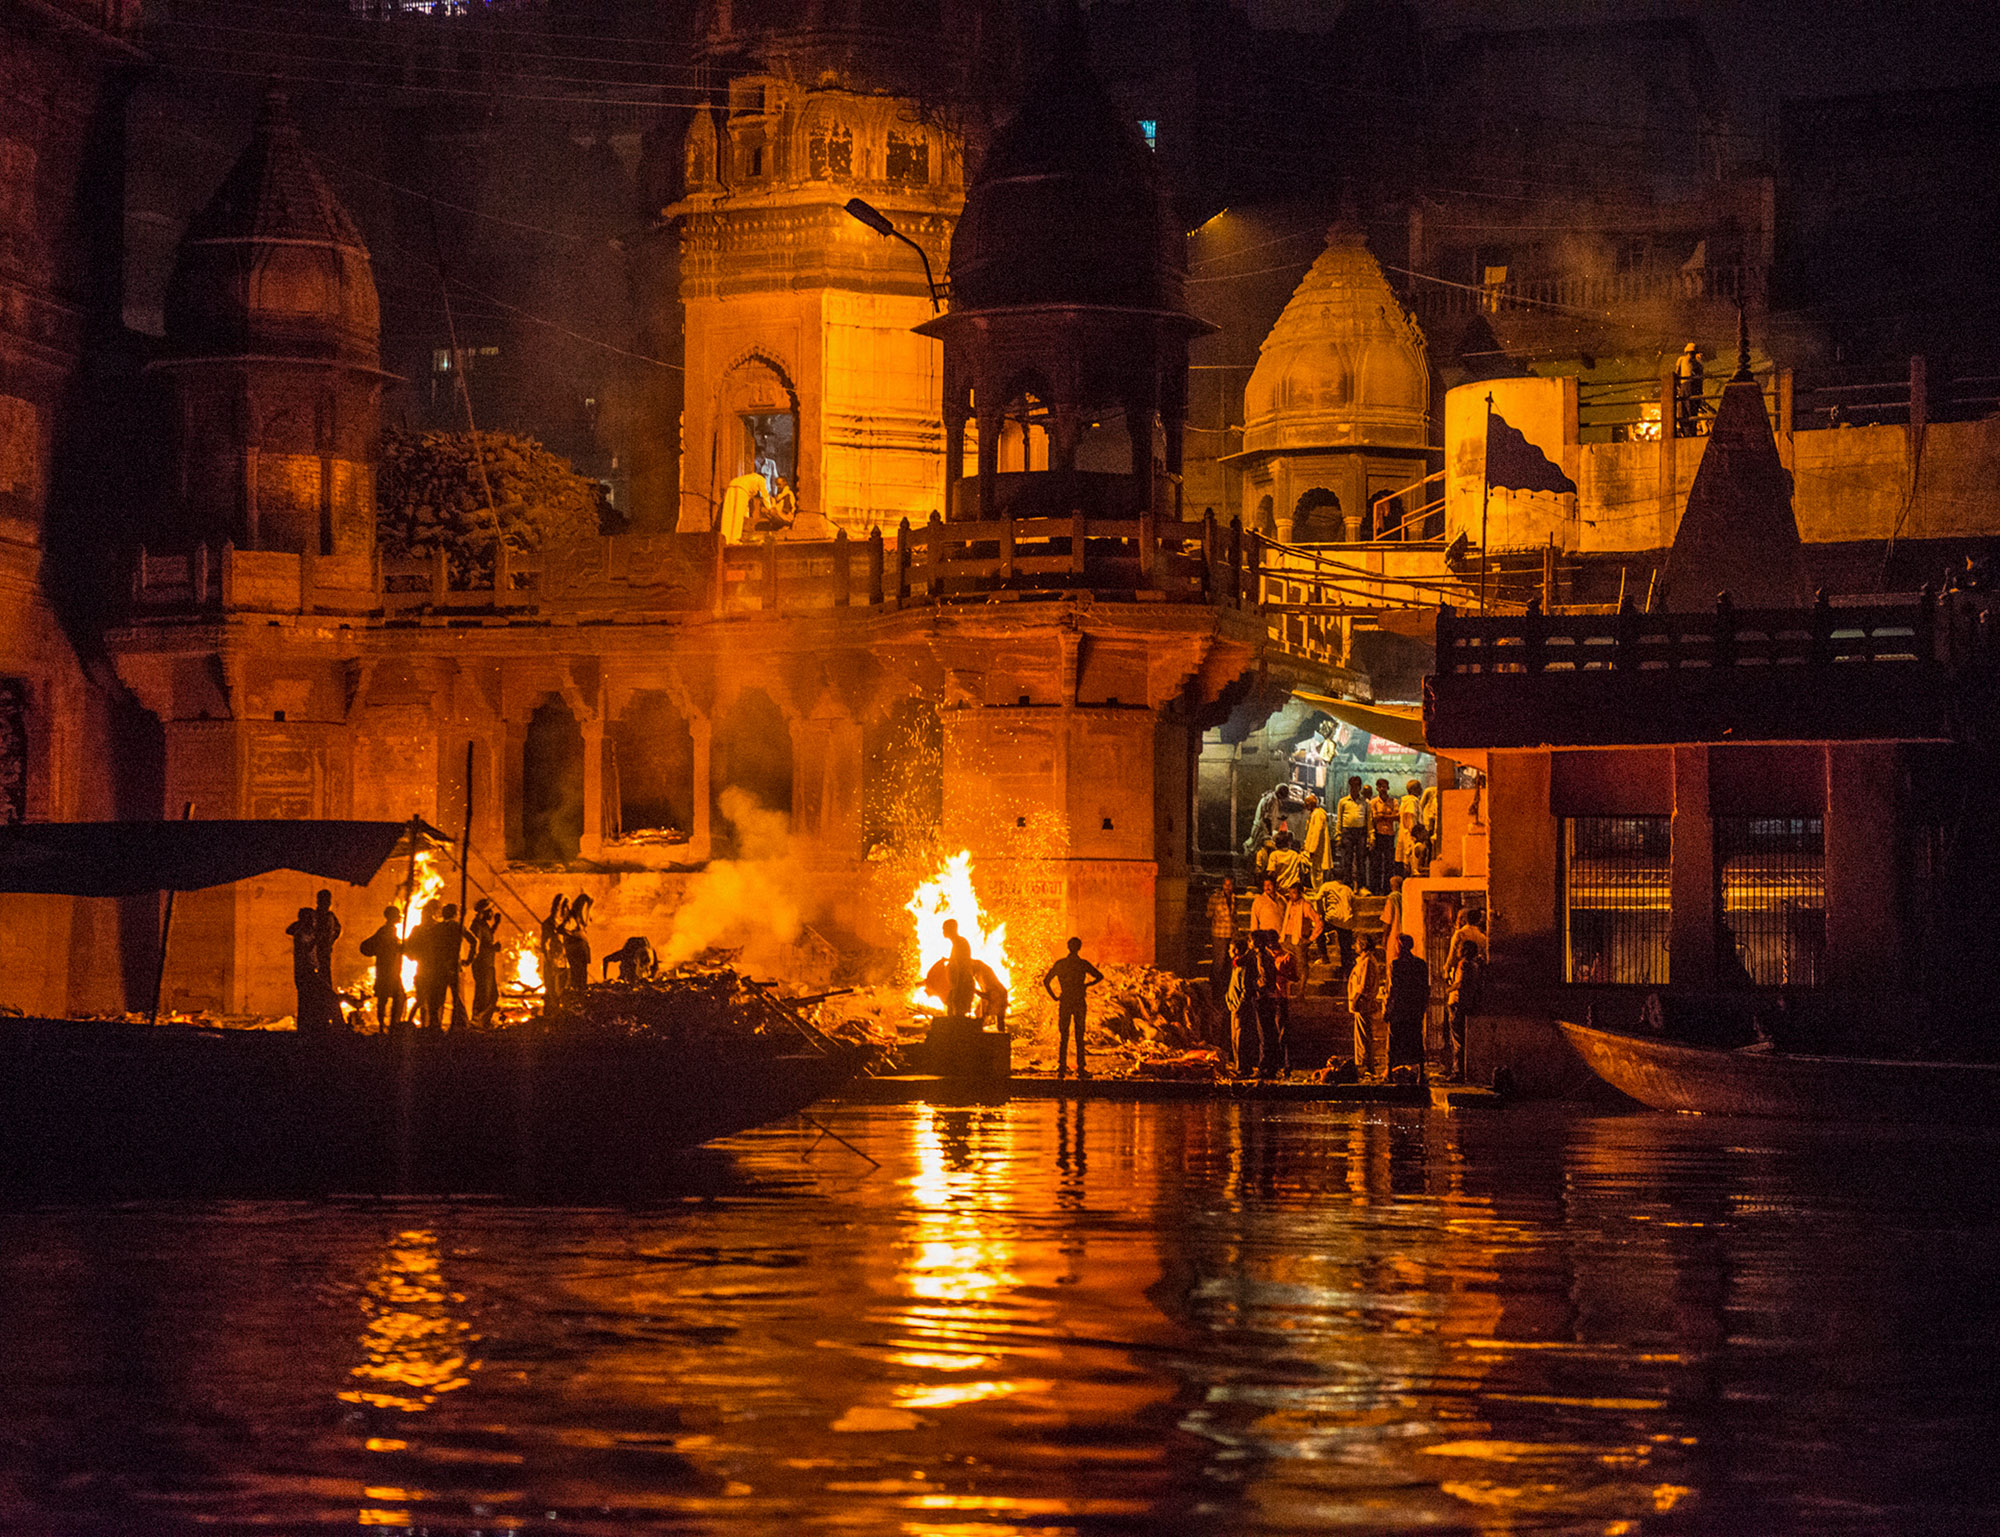  In Varanasi, India, funeral pyres run 24 hours a day. Many Hindu come to this ancient city to die since it is believed you will break the cycle of death and rebirth if your ashes are laid in the Ganges here. Many can't afford the funeral costs so many bodies are not properly cremated. Demand for wood has also taxes many of the Himalayan forests upstream.